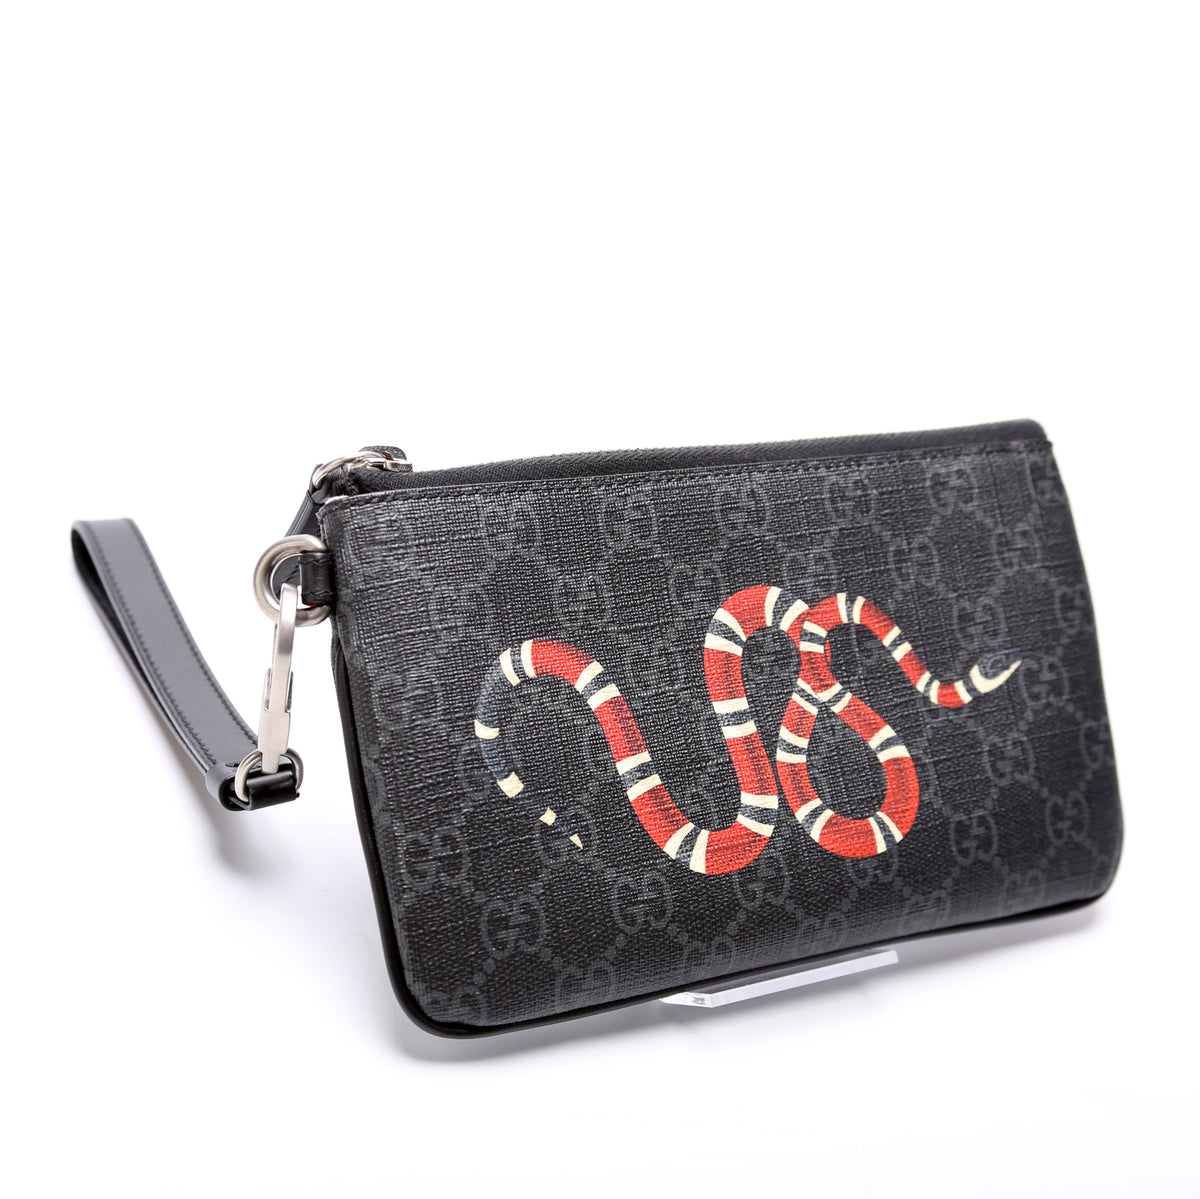 Gucci, Bags, New Gucci Gg Supreme Monogram Kingsnake Zip Around Wallet In  Black And Grey